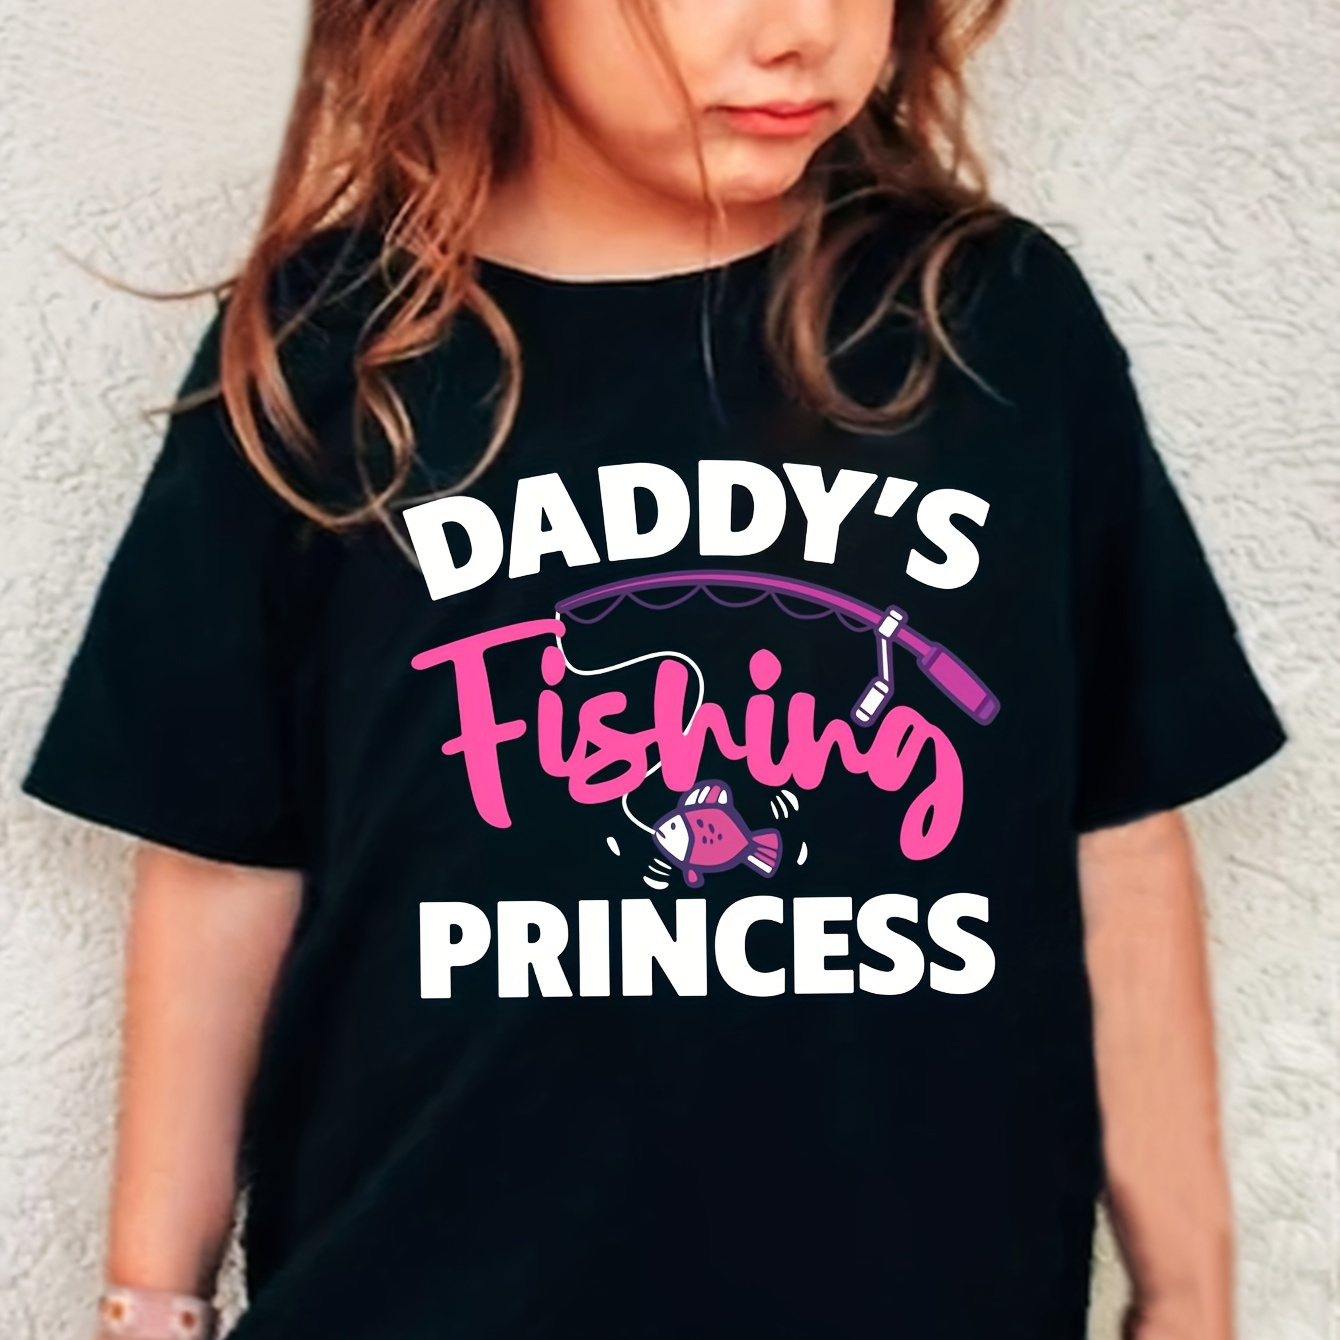 

Daddy's Fishing Princess Graphic Print Tee, Girls' Casual & Trendy Crew Neck Short Sleeve T-shirt For Spring & Summer, Girls' Clothes For Outdoor Activities